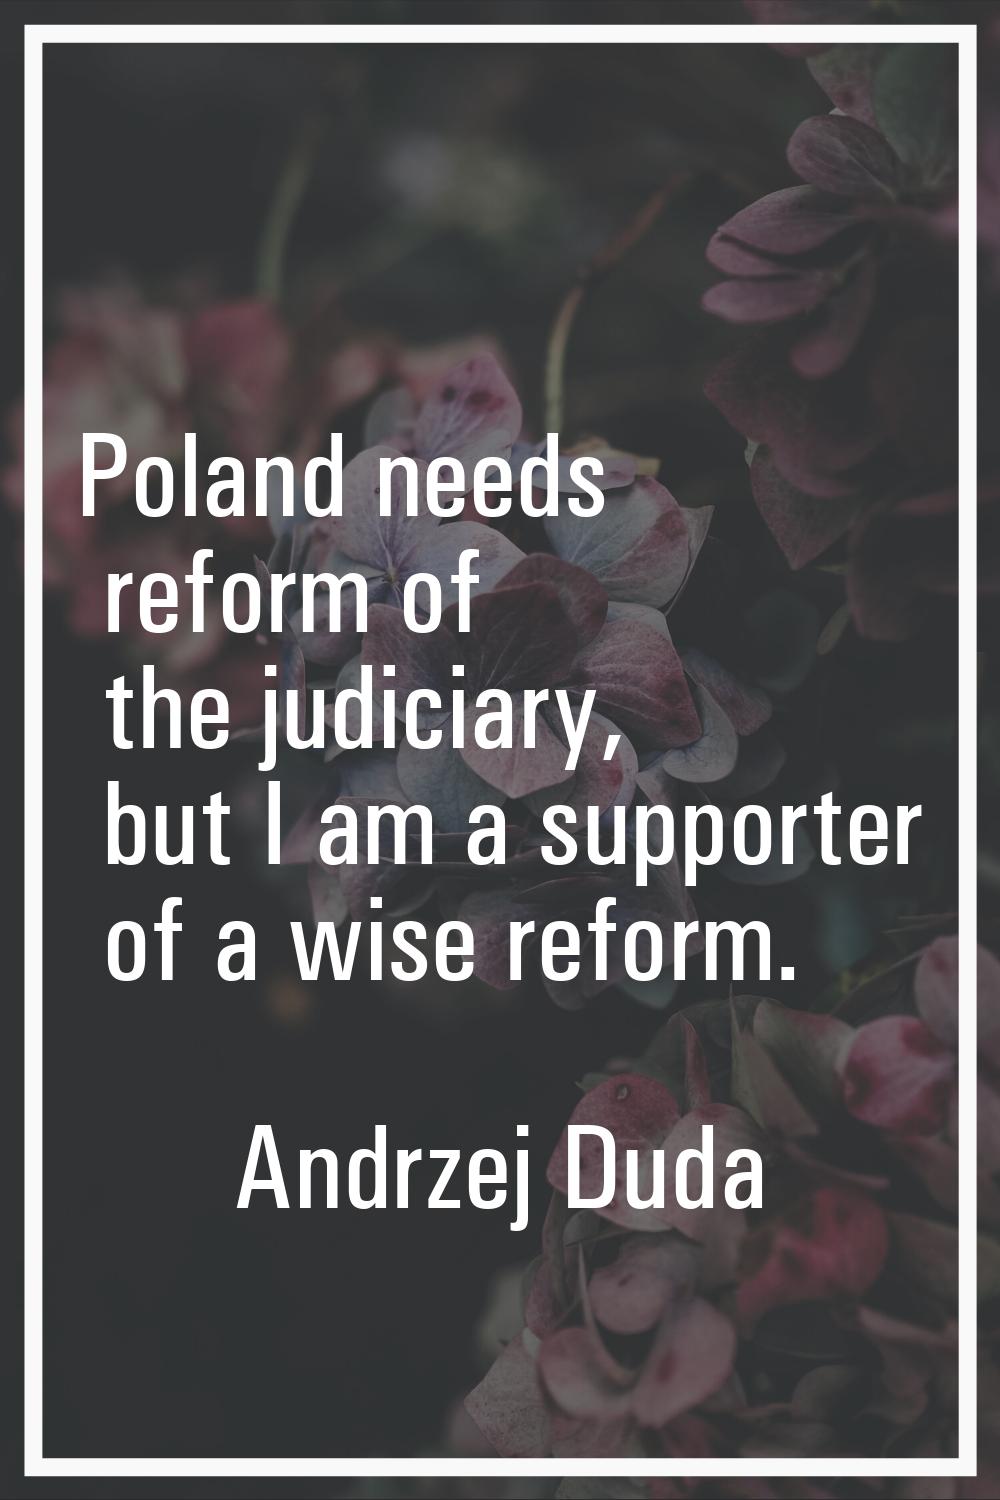 Poland needs reform of the judiciary, but I am a supporter of a wise reform.